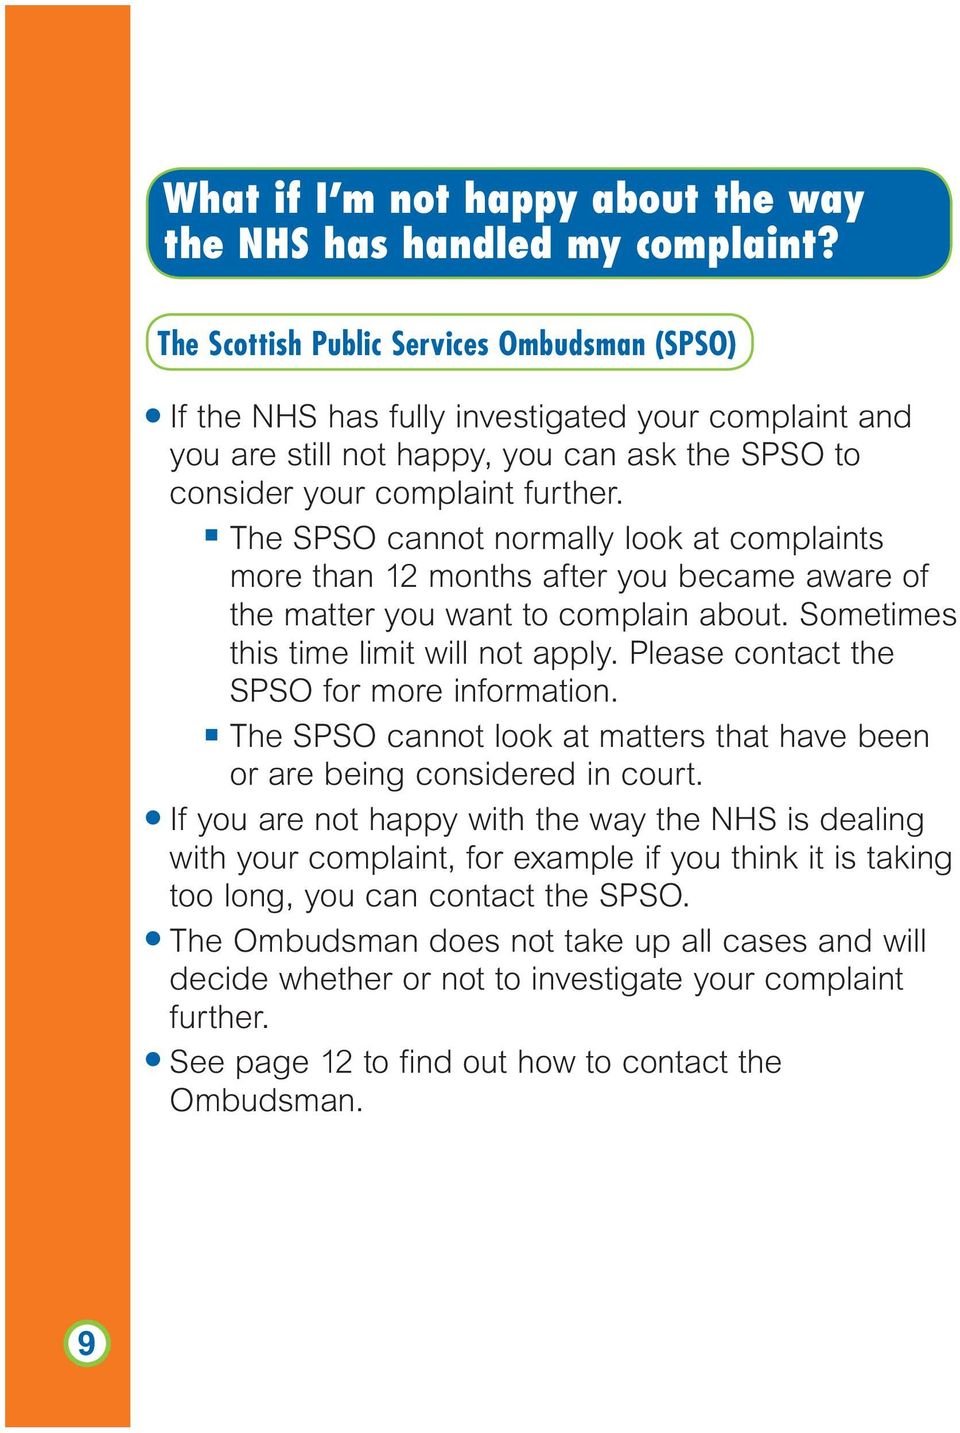 The SPSO cannot normally look at complaints more than 12 months after you became aware of the matter you want to complain about. Sometimes this time limit will not apply.